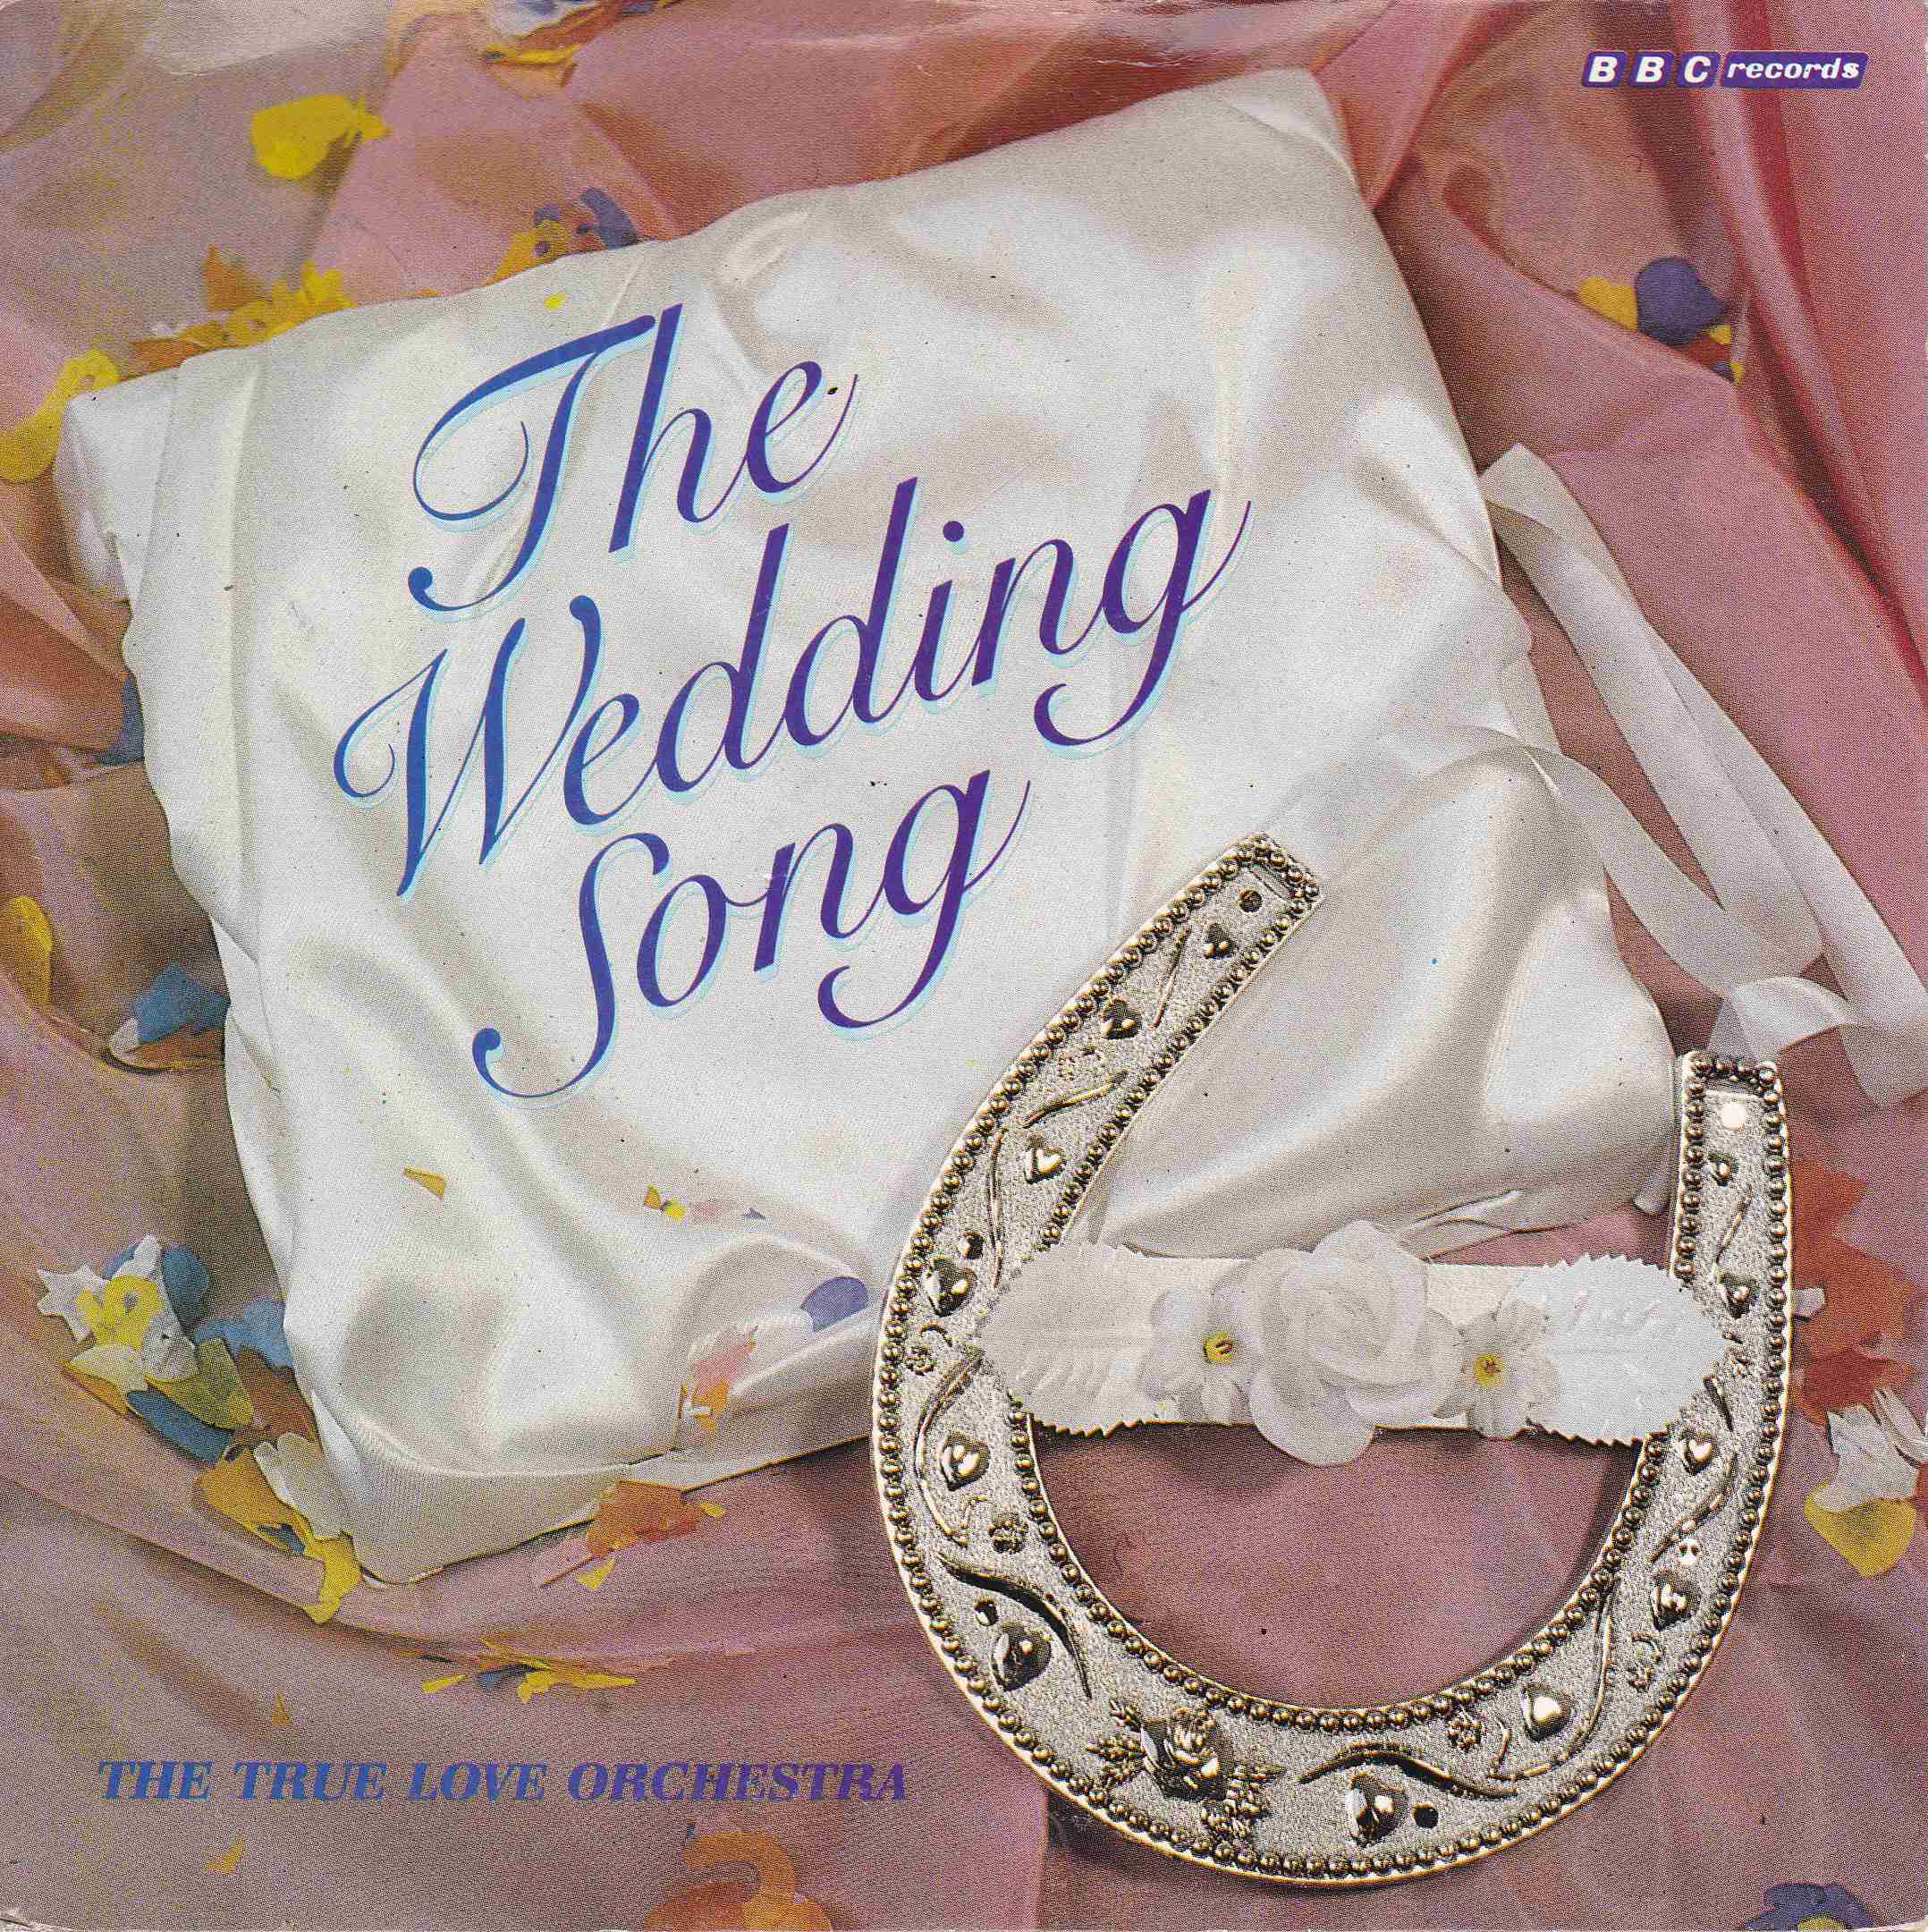 Picture of The wedding song by artist John MacCalman / The True Love Orchestra from the BBC singles - Records and Tapes library